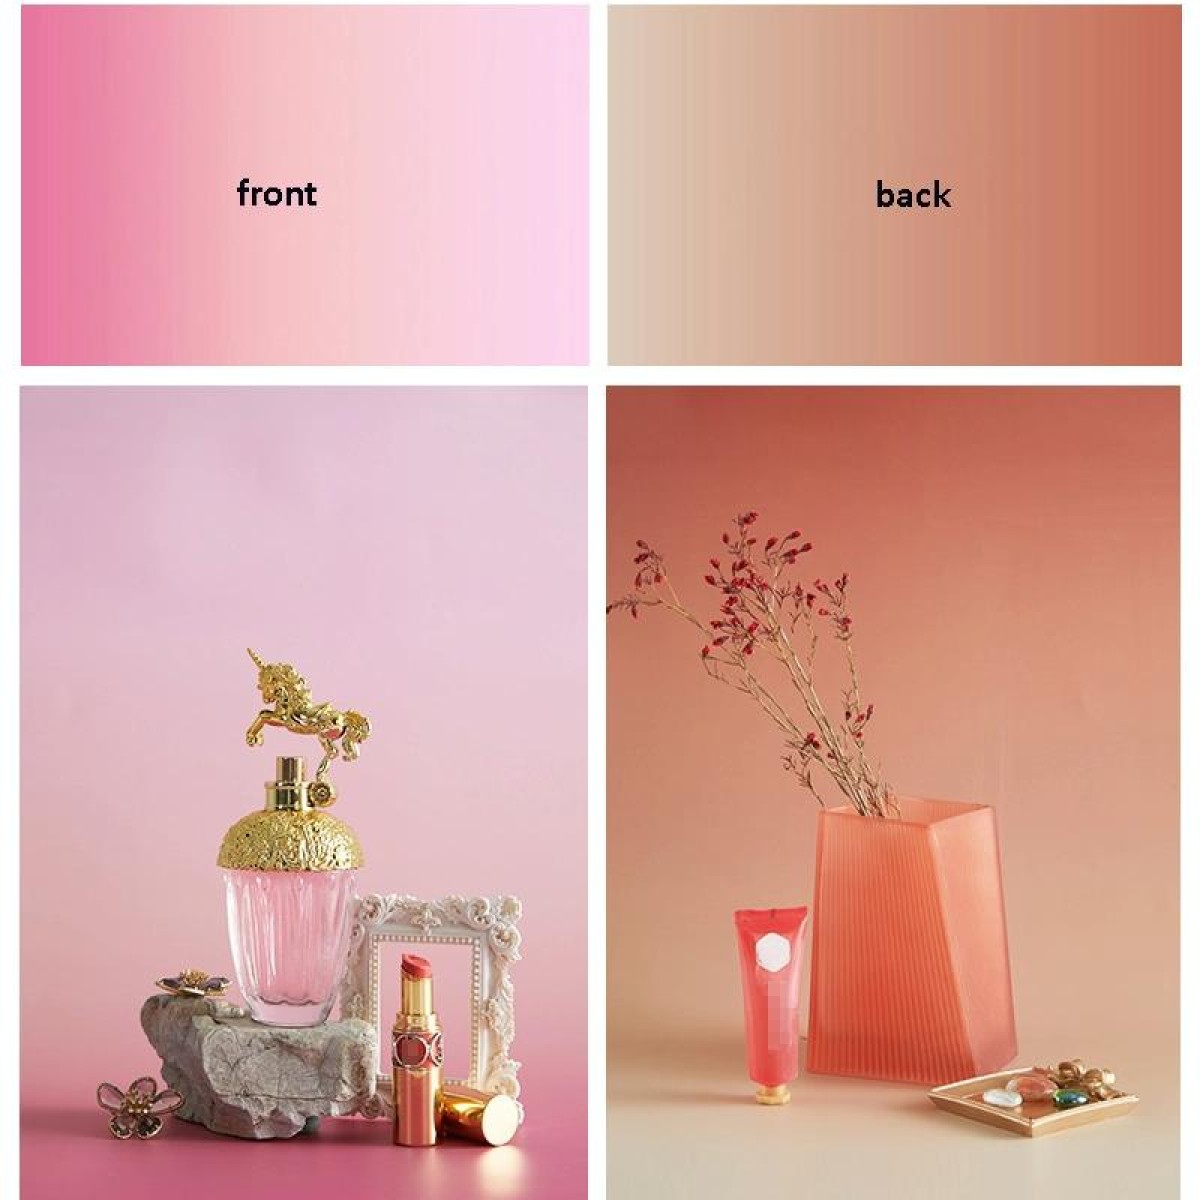 57 x 87cm Double-sided Gradient Background Paper Atmospheric Still Life Photography Props(Orange Meat +Pink)